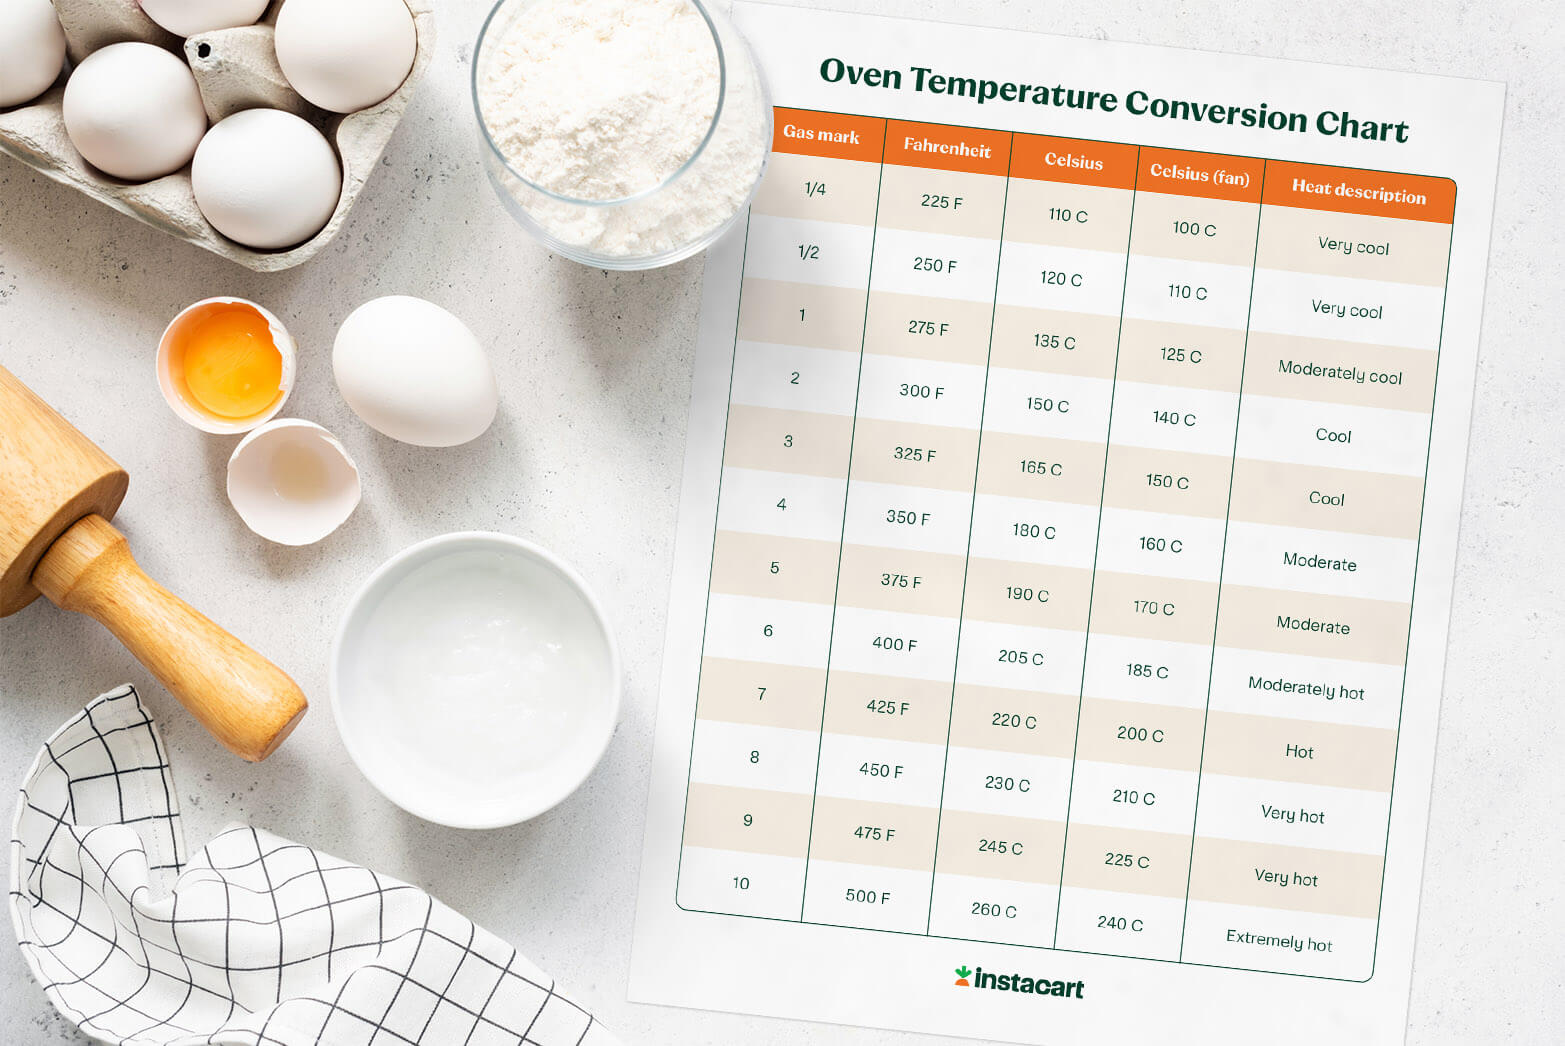 Oven Temperature Chart – Apron Free Cooking